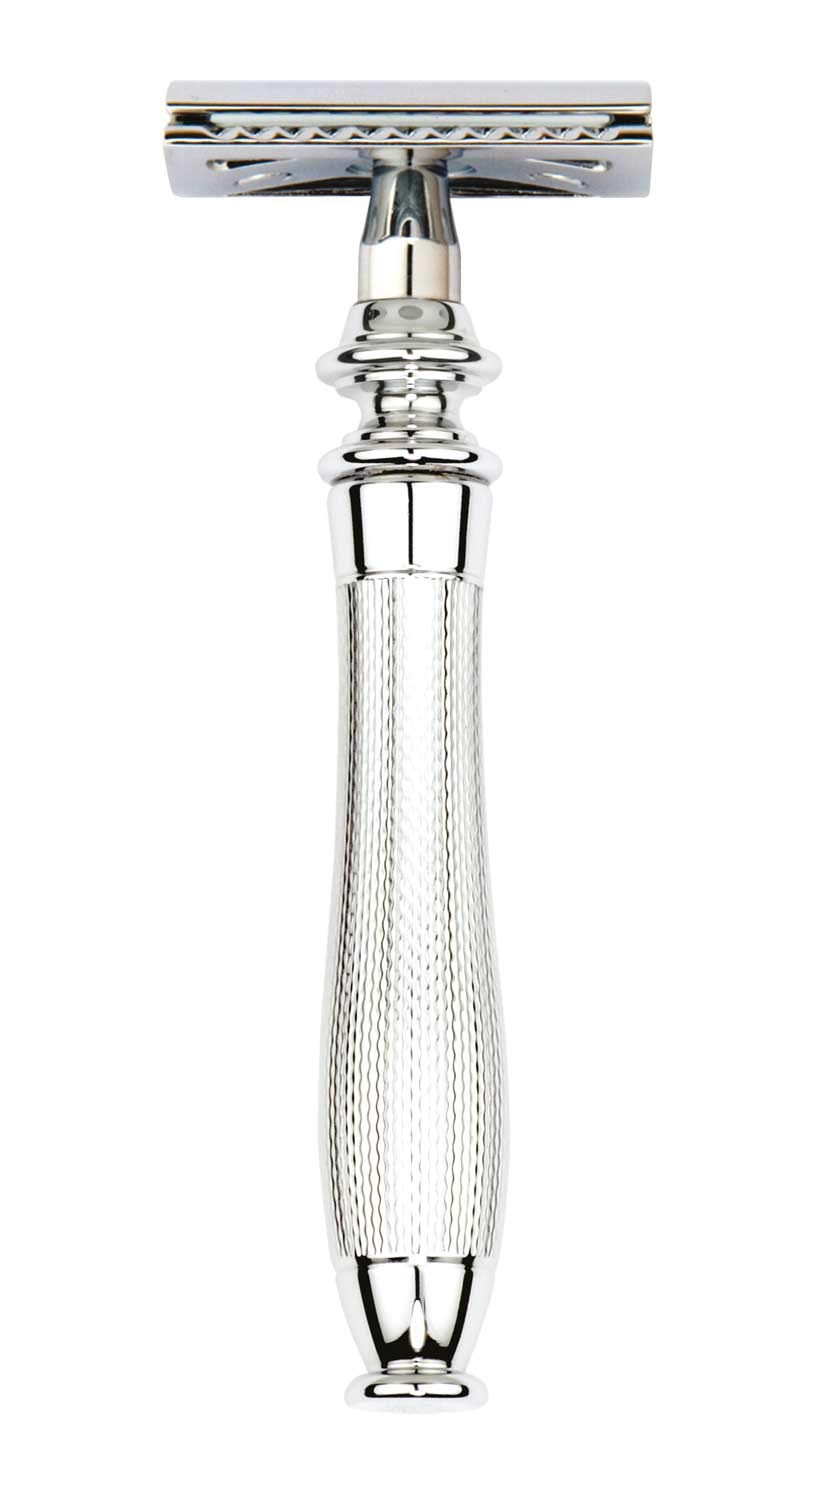 Load image into Gallery viewer, Edwin Jagger Chatsworth Barley Chrome 3 Piece  Safety Razor Set W/ Silver Tip Badger
